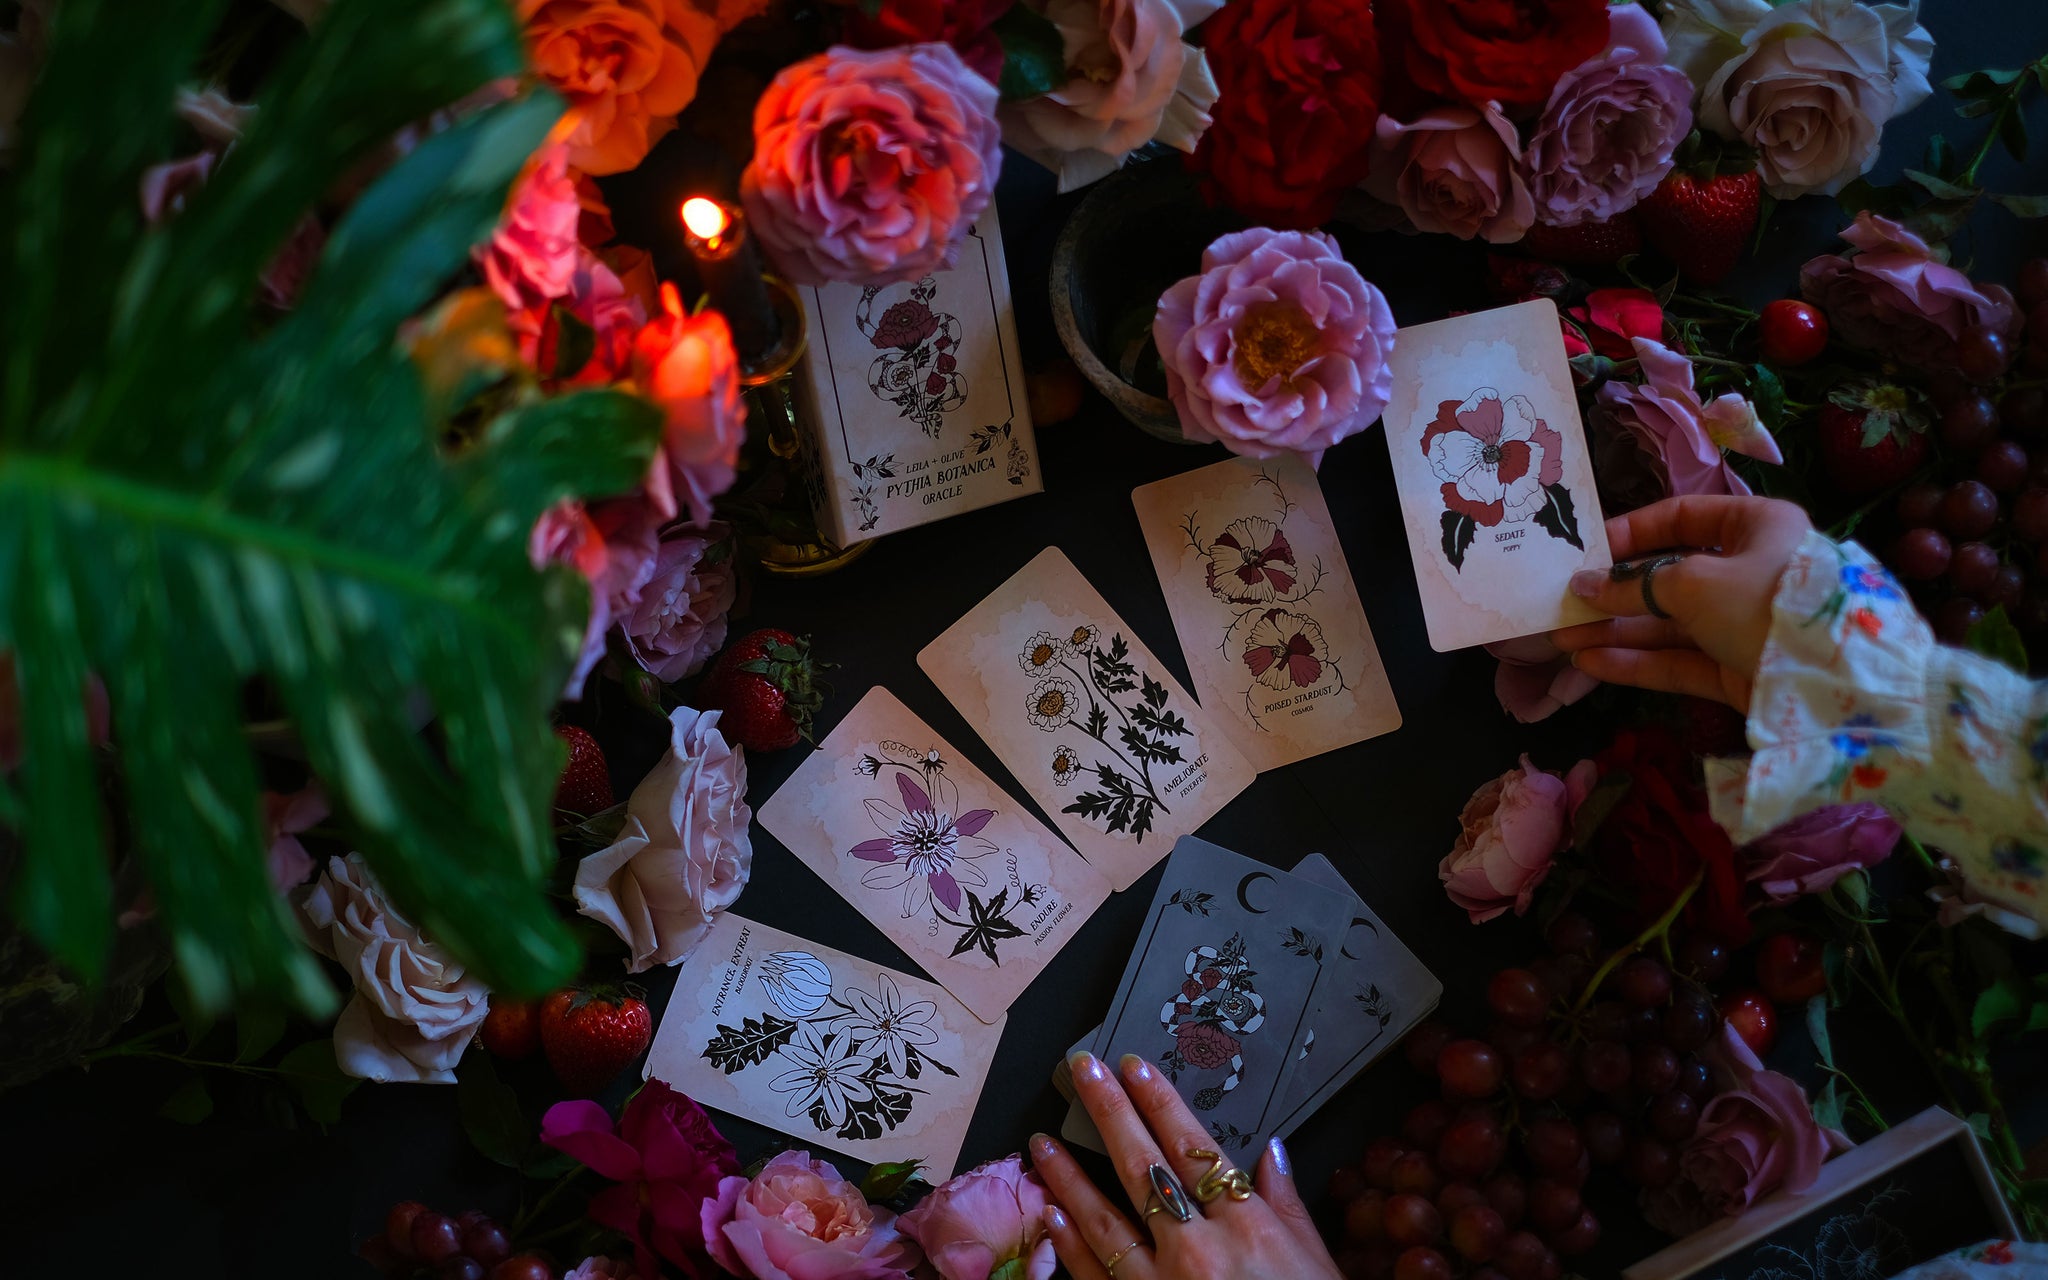 Pythia Botanica is the original Botanical Oracle deck, illustrated by hand and rooted in Greek mythology and plant magic. Read these cards in traditional Tarot spreads and allow the spirit of these plants to guide you. 